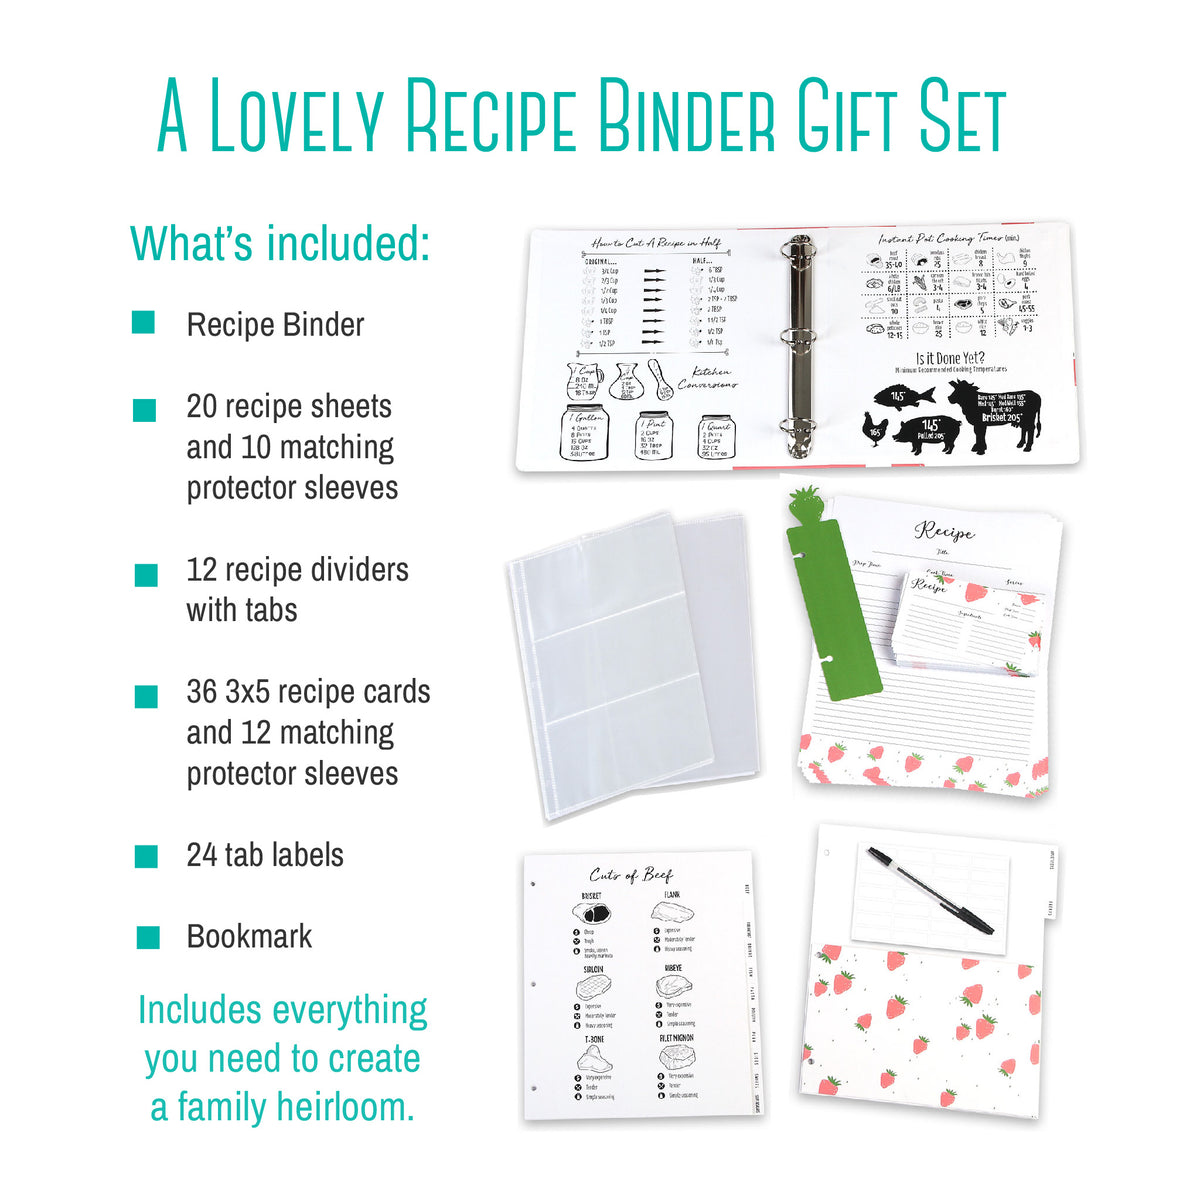 Outshine Kitchen Blank Recipe Cards 3x5 Inches Thick Cardstock